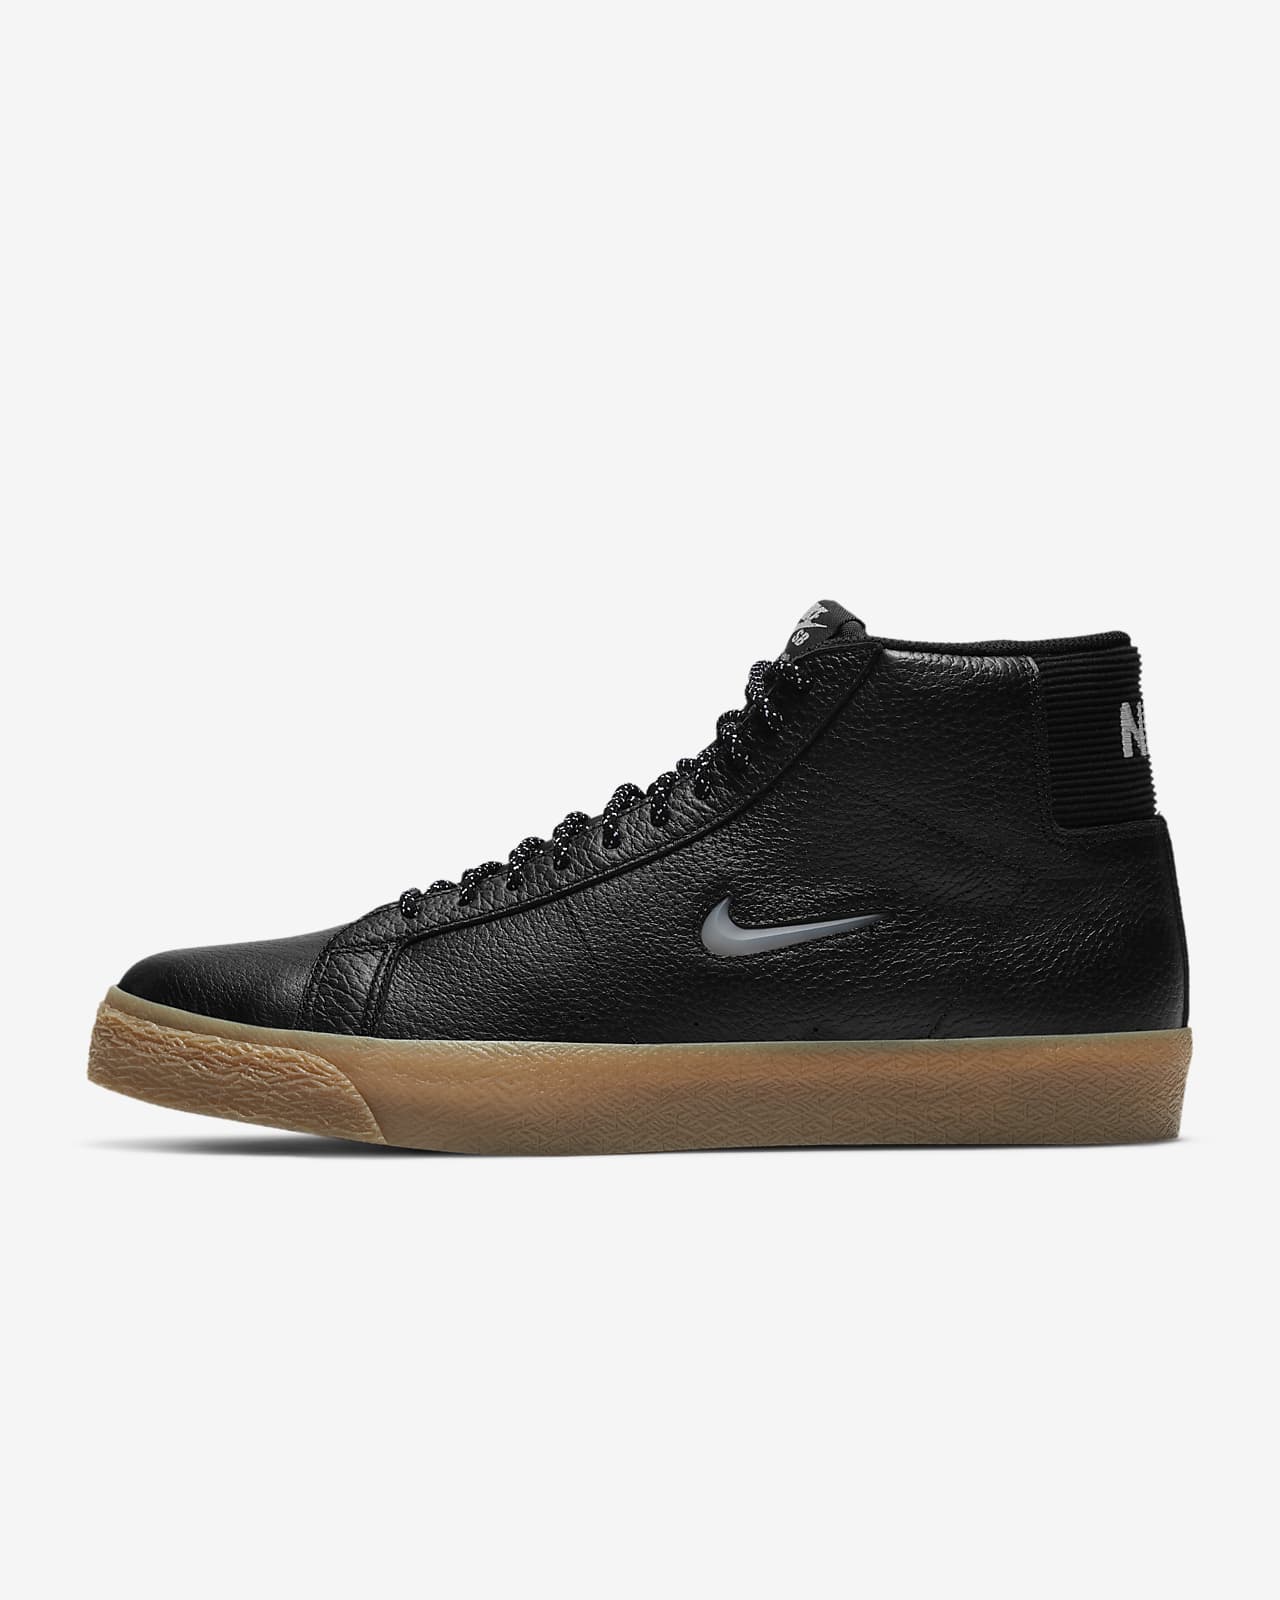 leather nike skate shoes